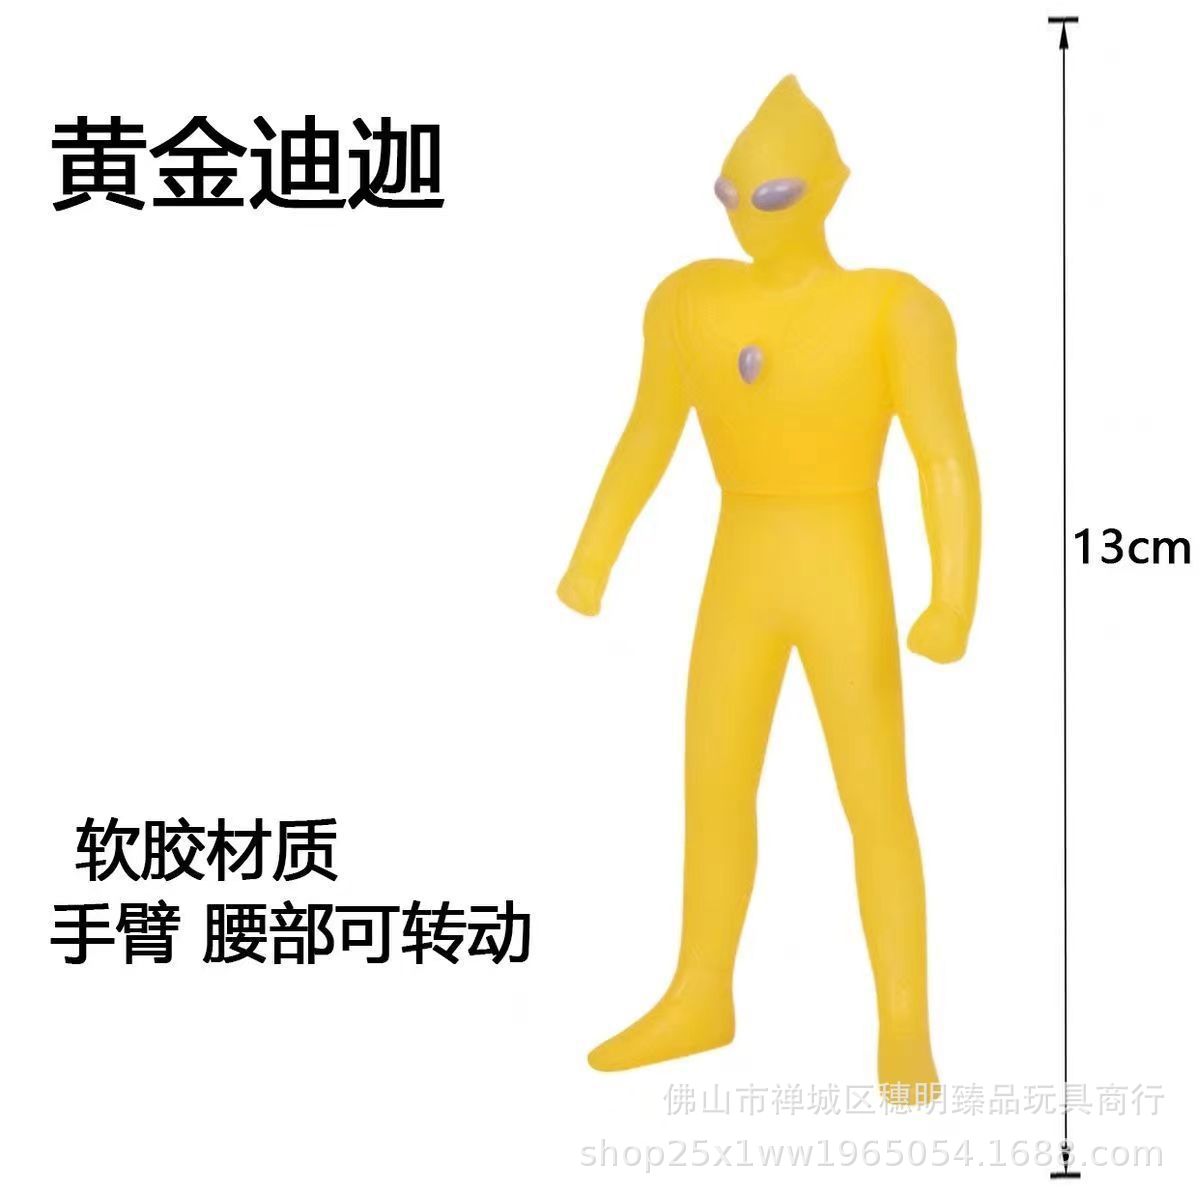 Small size 13cm boutique toy soft rubber Ultraman monster jewelry Ultraman doll machine boy birthday gift